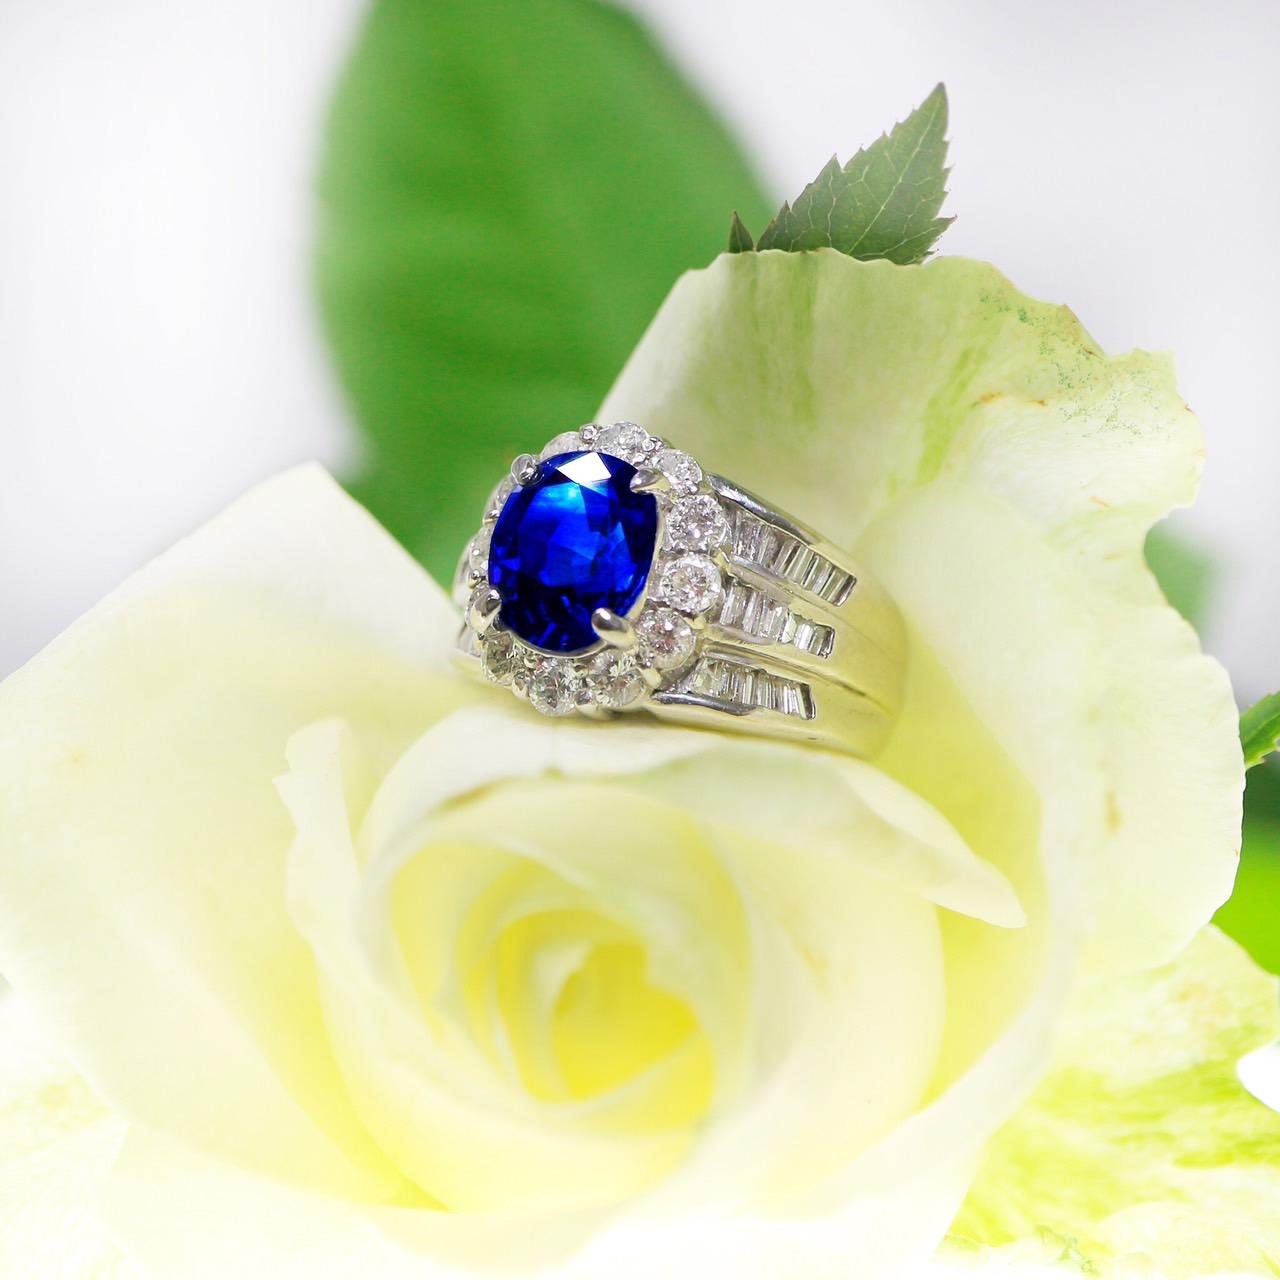 *Certified PT900 3.30 ct Royal Blue Sapphire&Diamonds Antique Art Deco Engagement Ring*
AIGS-Certified natural royal blue sapphire as the center stone weighing 3.30 ct set on the PT900 white platinum halo design and pave' band with natural FG VS